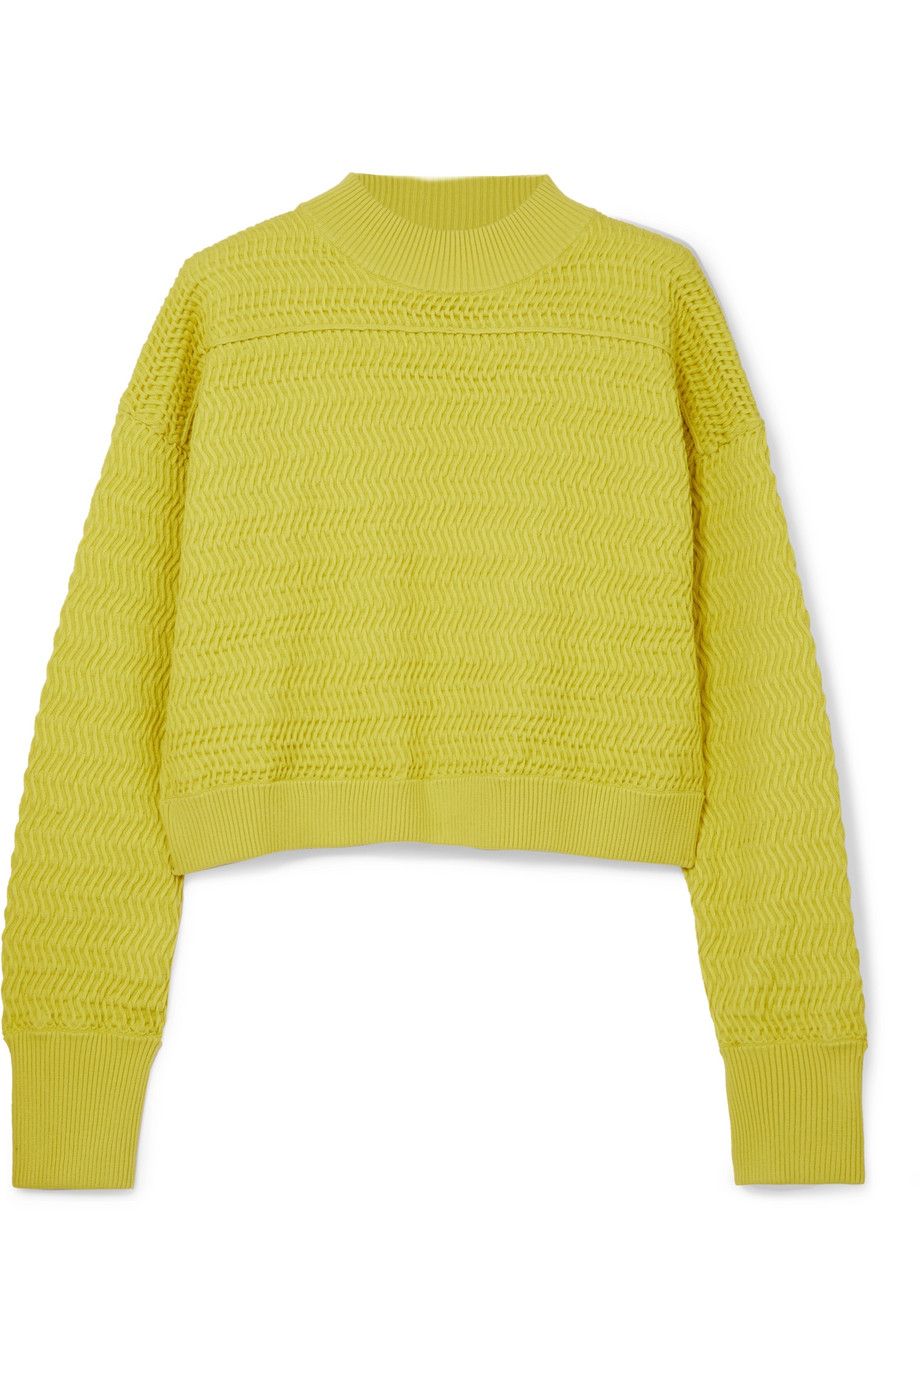 Clothing, Yellow, Green, Sleeve, Sweater, Outerwear, Jersey, Top, Jacket, Cardigan, 